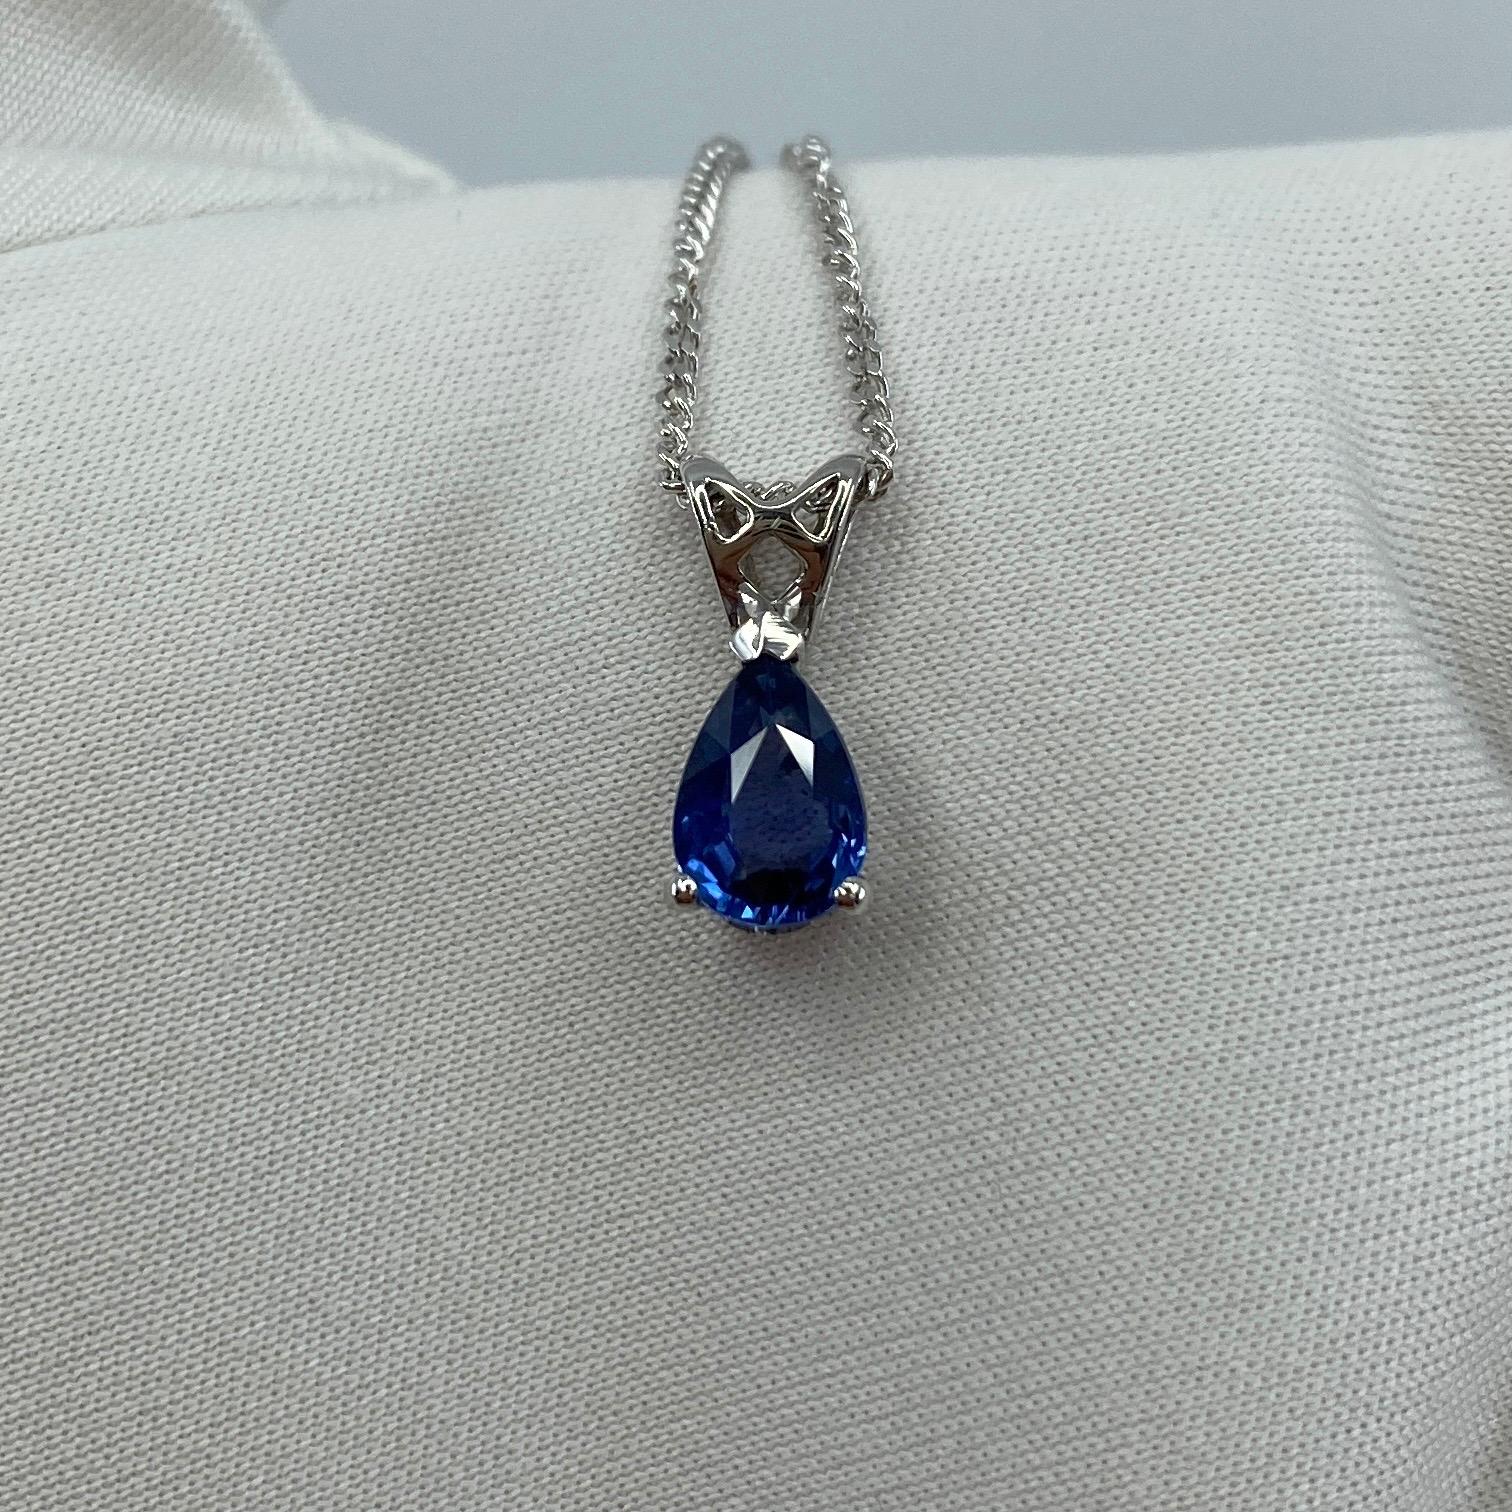 Fine Ceylon Blue Sapphire 18k White Gold Pendant.

Stunning 1.03 carat blue sapphire with a vivid blue colour and excellent clarity, very clean stone. Set in a beautiful 18k white gold heart motif pendant setting.
The sapphire also has an excellent